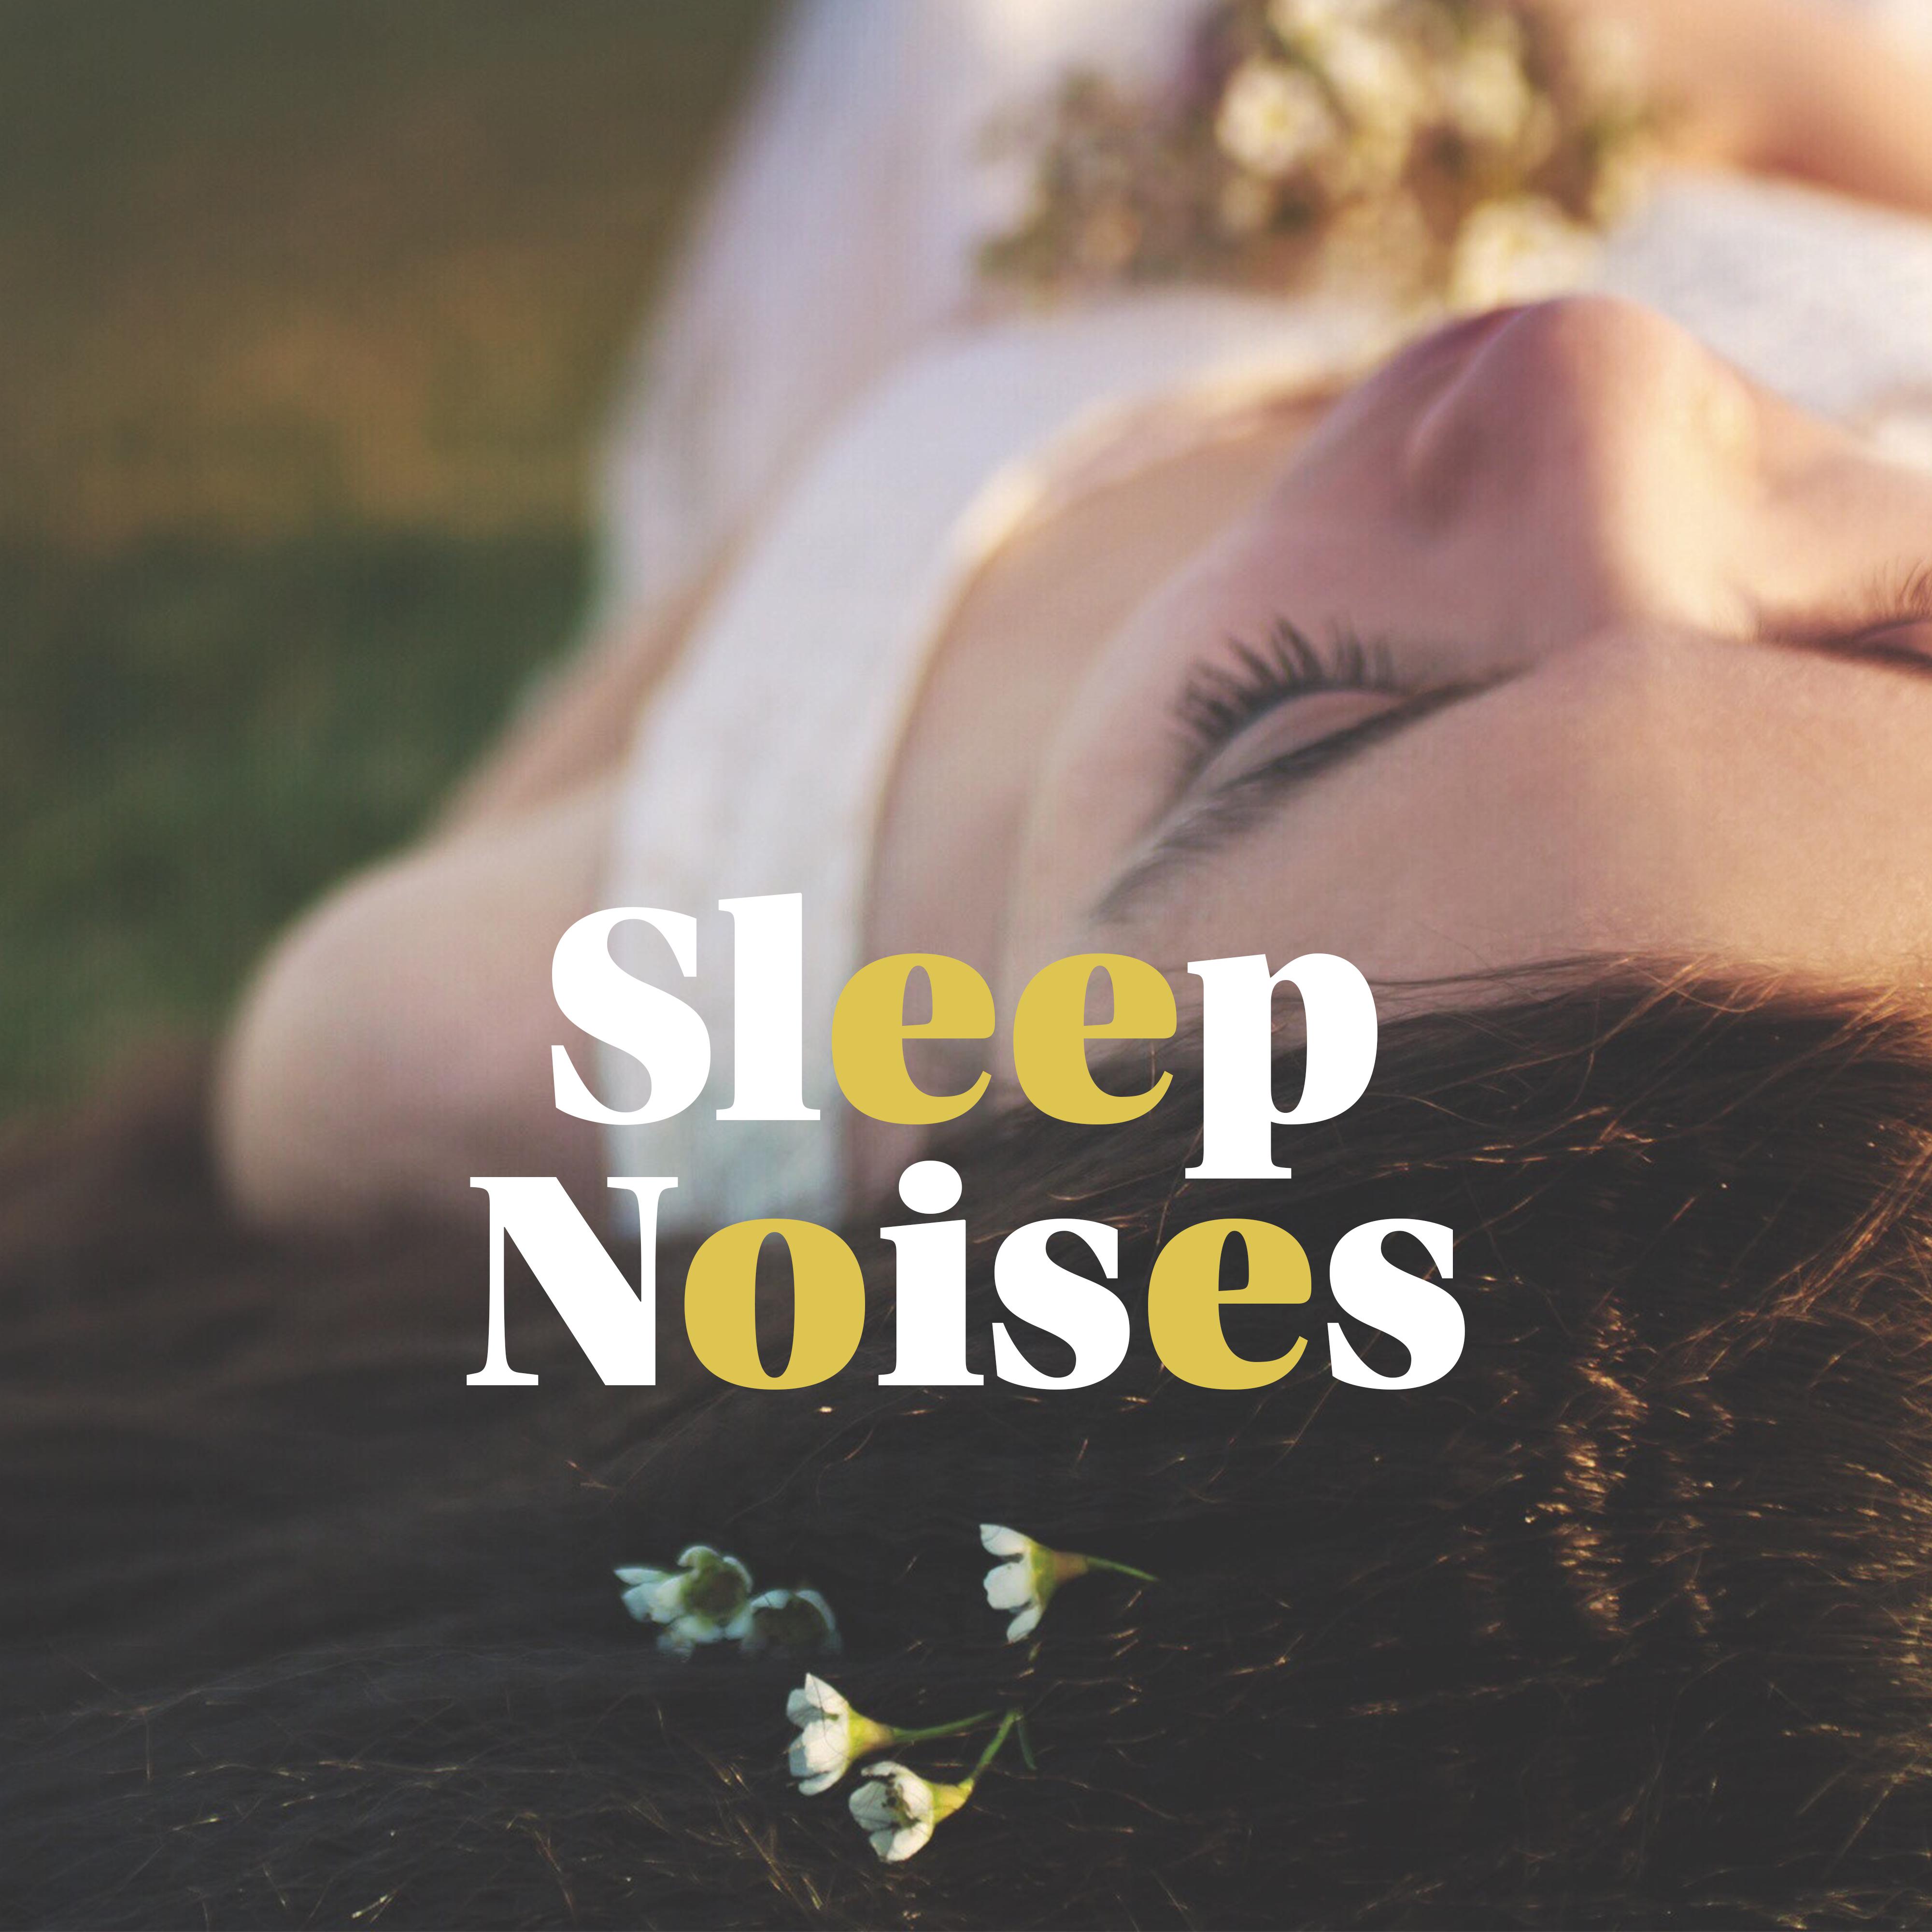 Sleep Noises - Binaural Stereo Melodies with Natural Soundscapes Designed for Sleep and as an Aid in Easy and Fast Falling Asleep